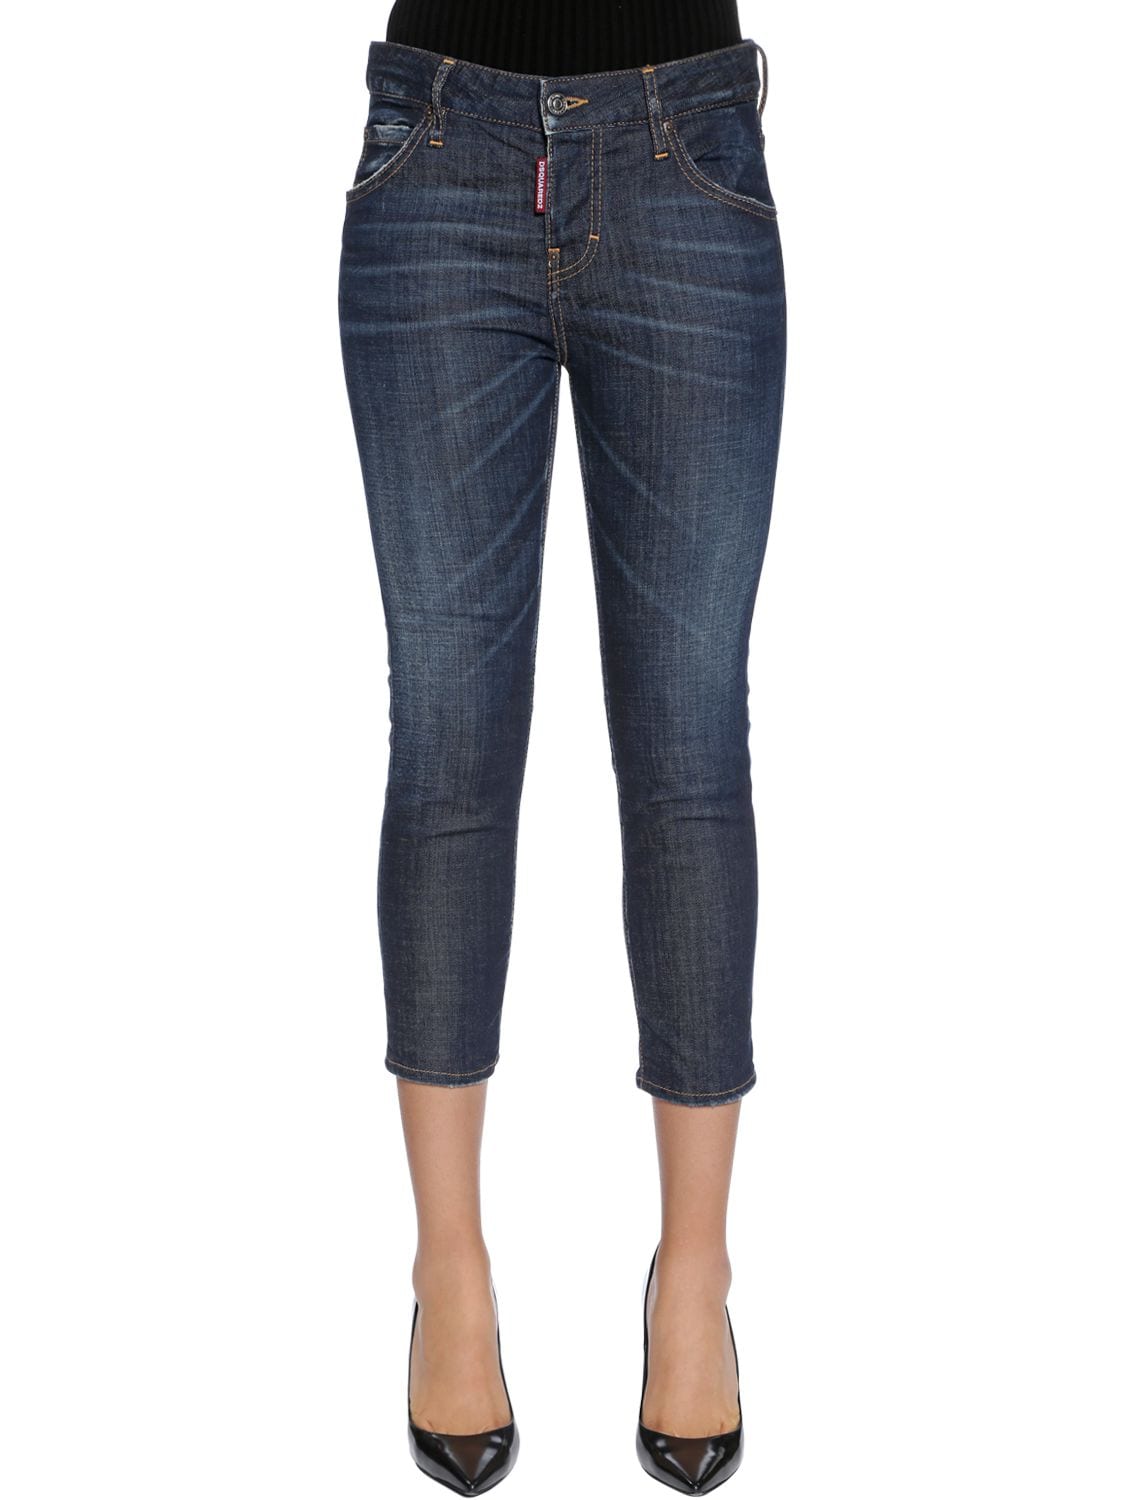 DSQUARED2 COOL GIRL CROPPED COTTON DENIM JEANS,67IAGF018-NDCW0